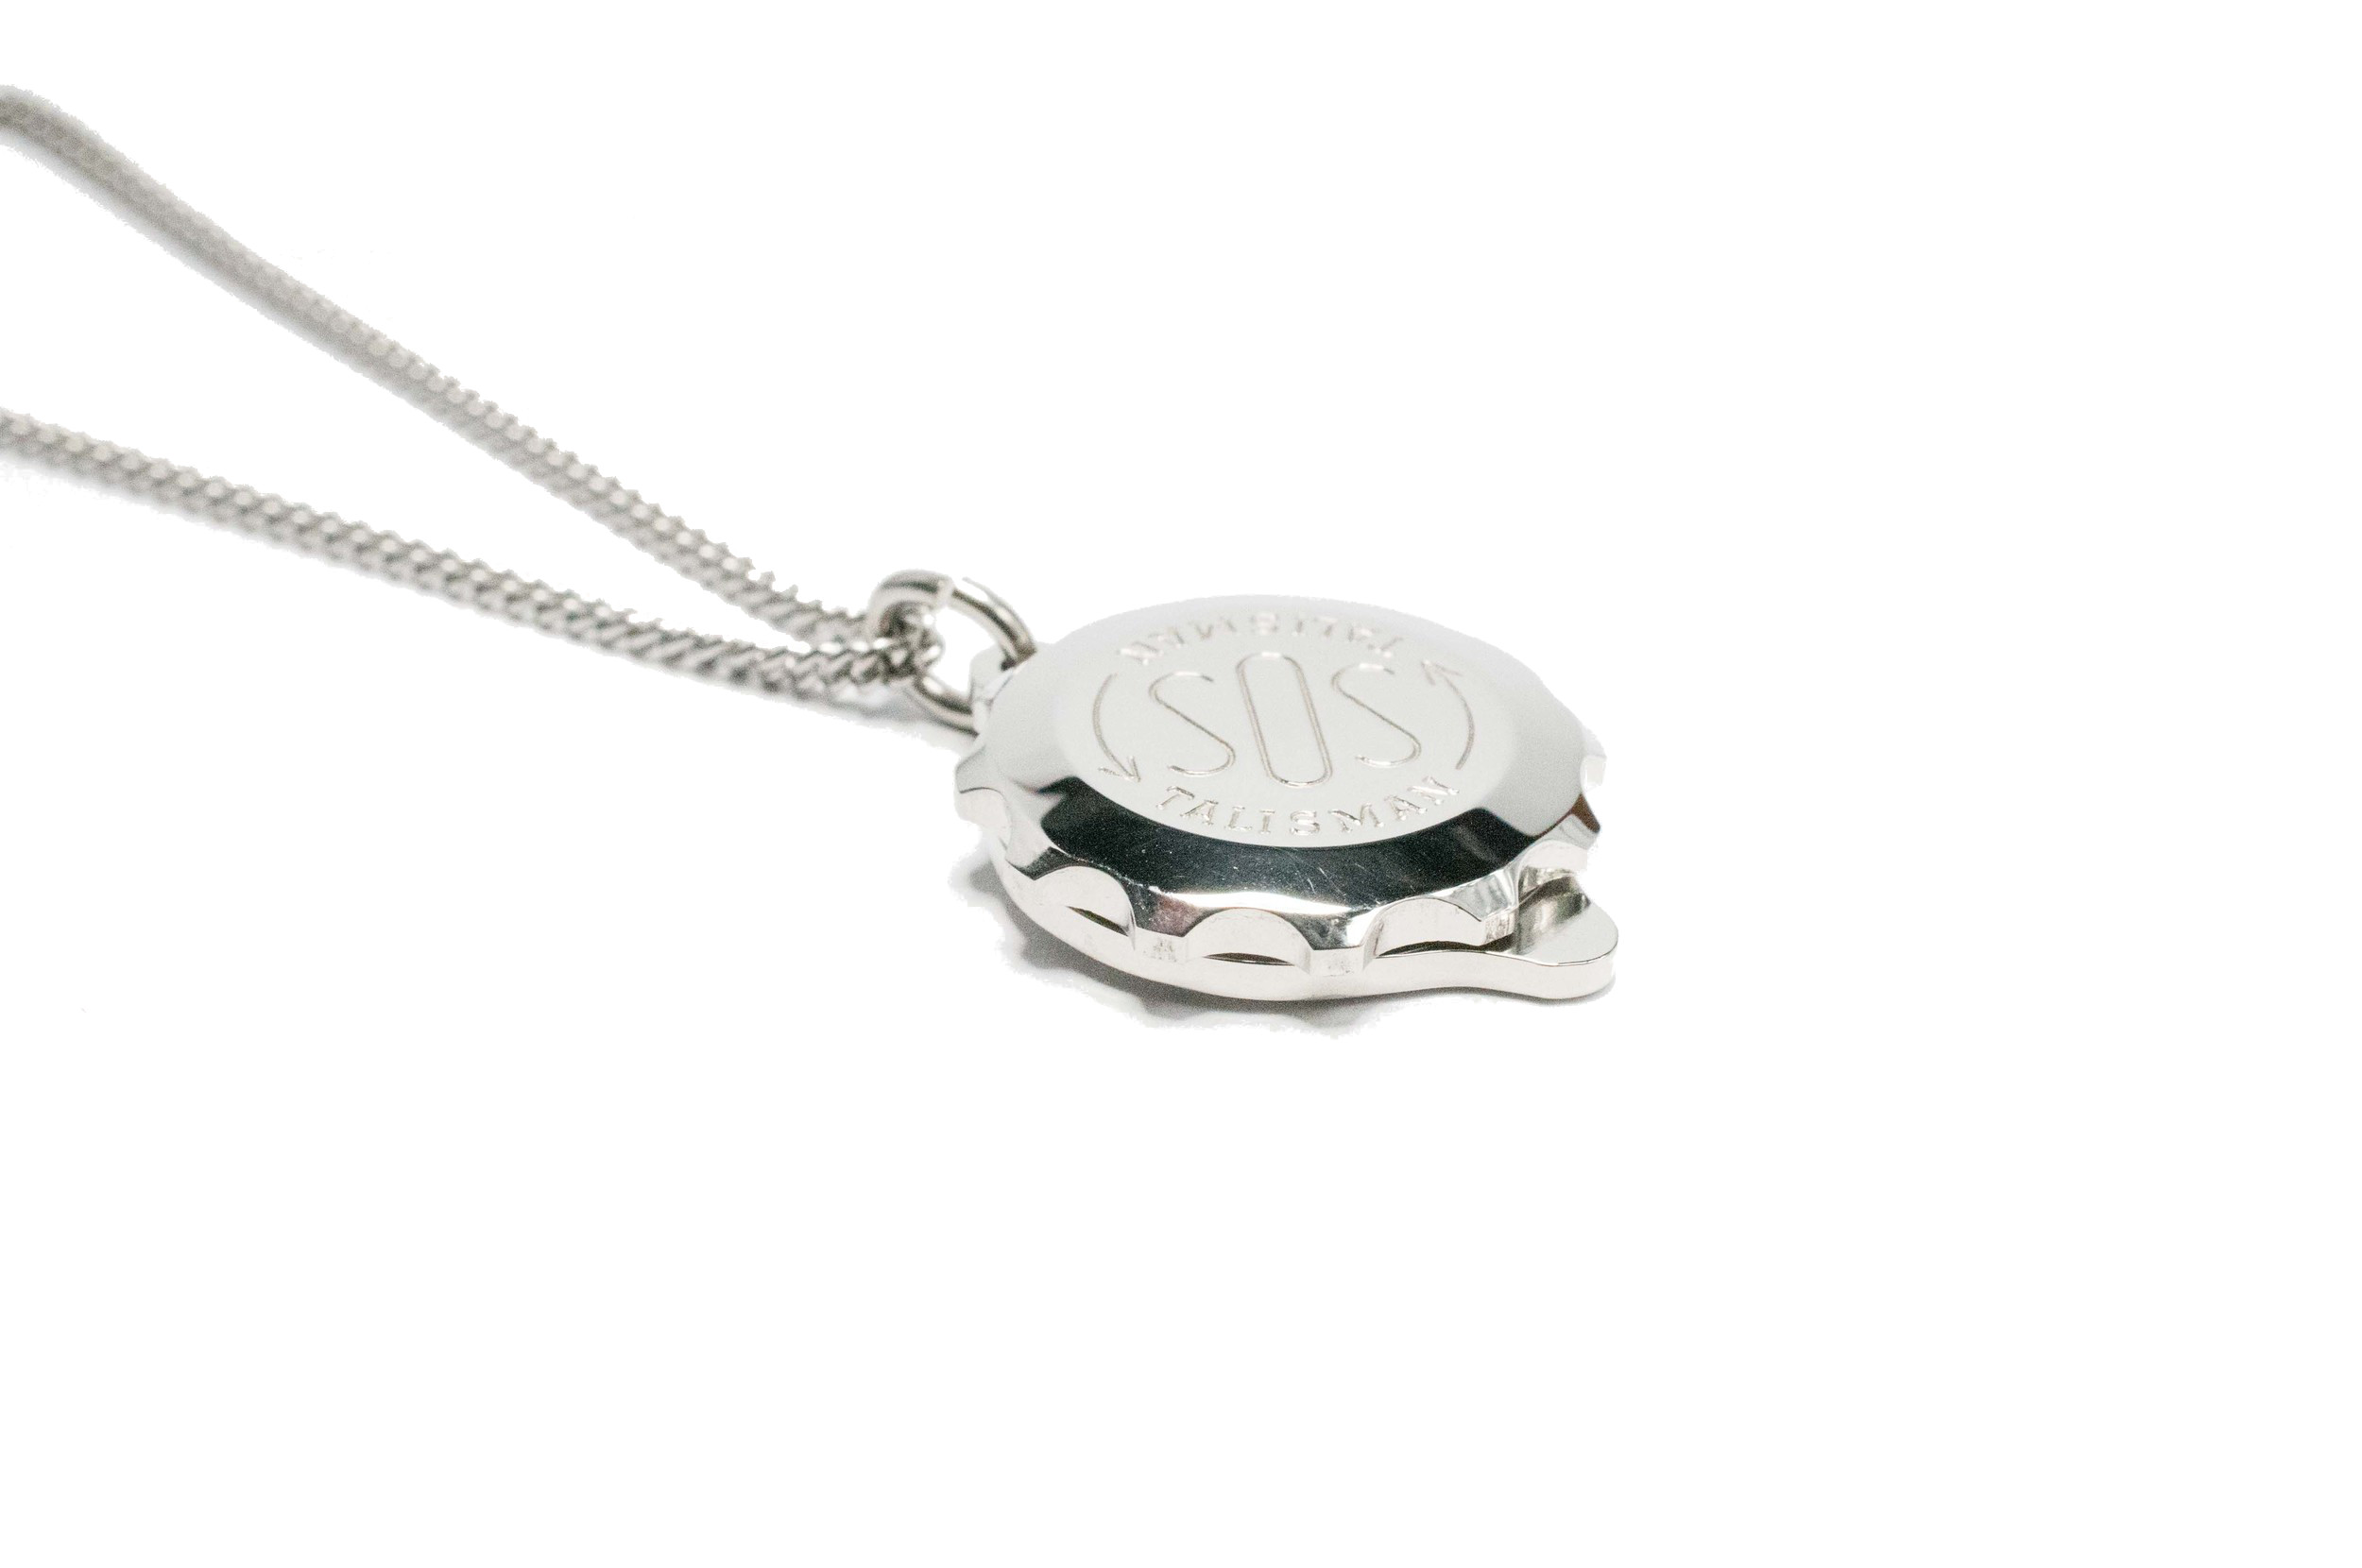 Christopher SOS Talisman Stainless Steel Medical Pendant St 